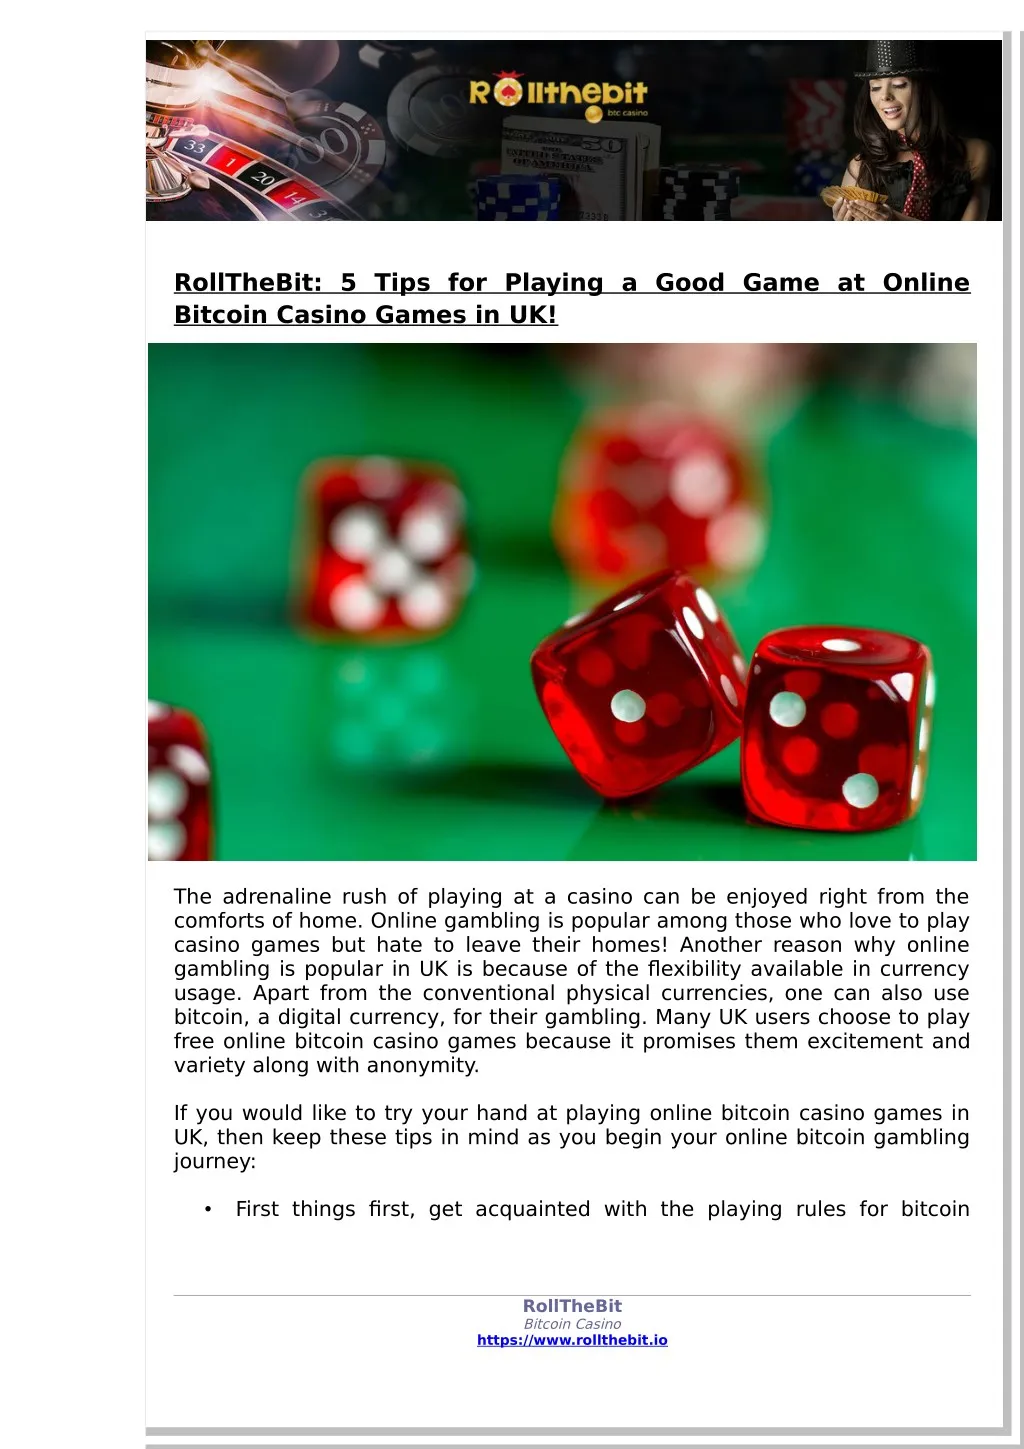 rollthebit 5 tips for playing a good game